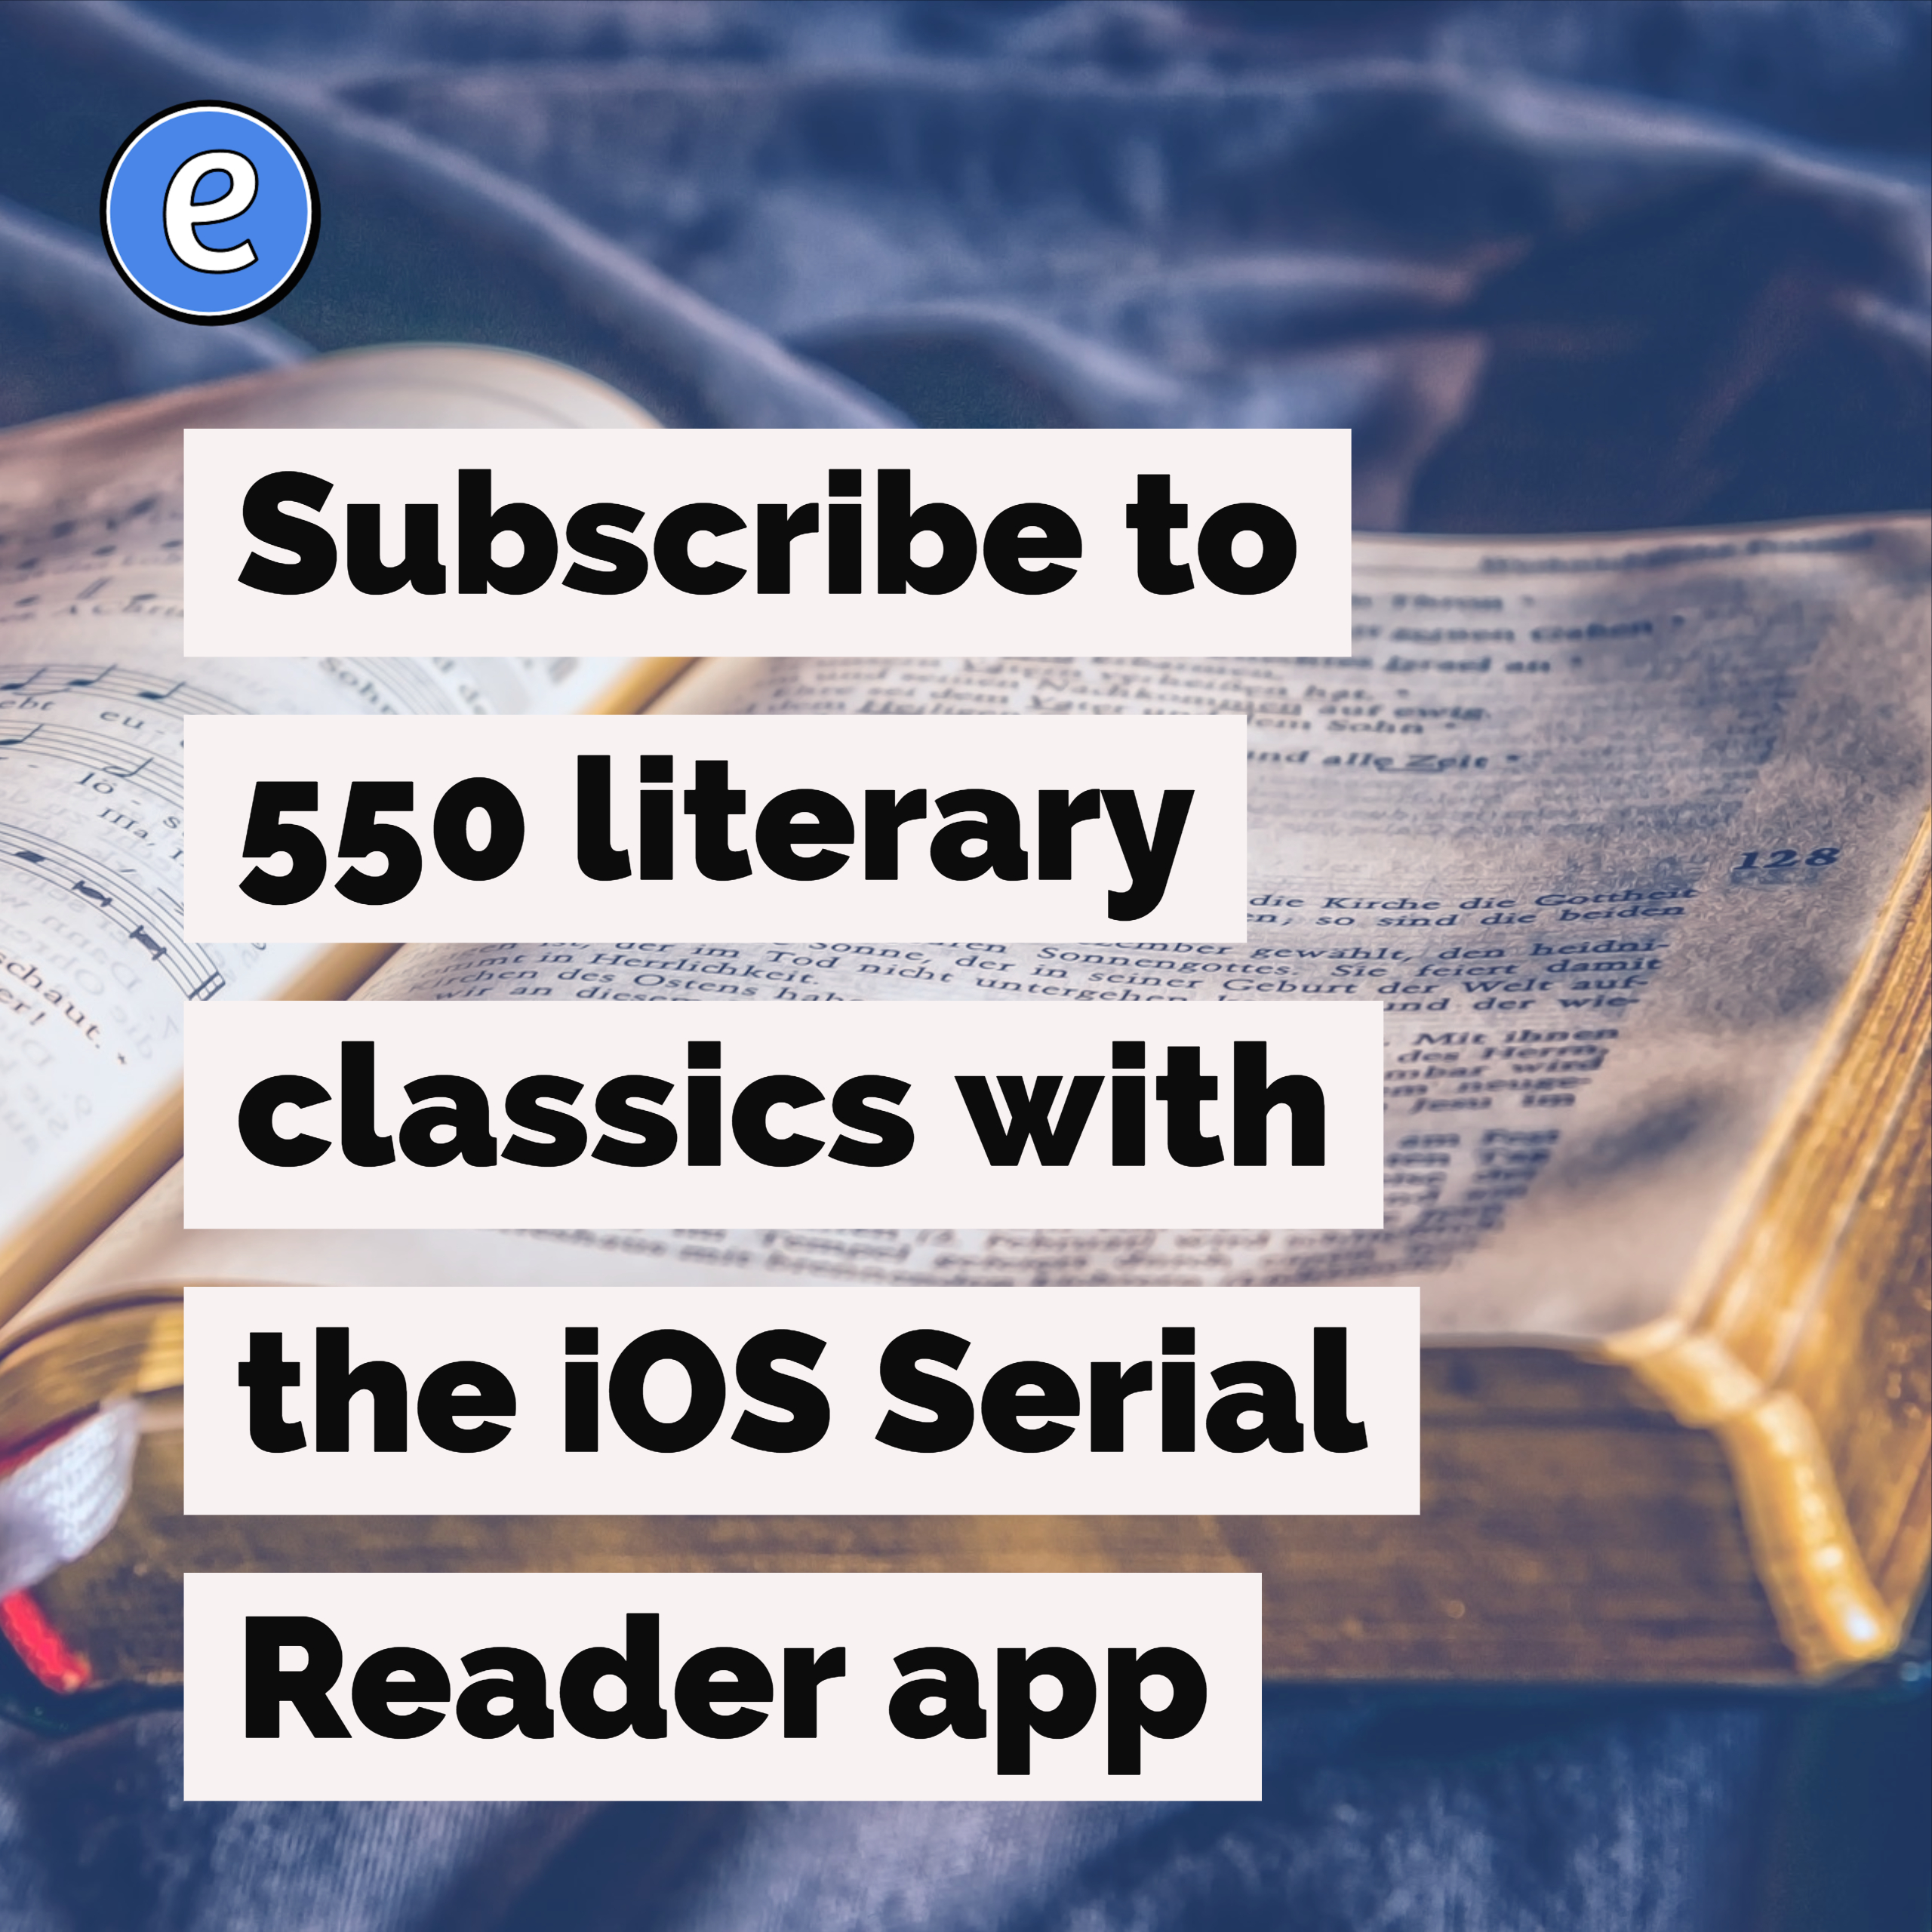 Subscribe to 550 literary classics with the iOS Serial Reader app